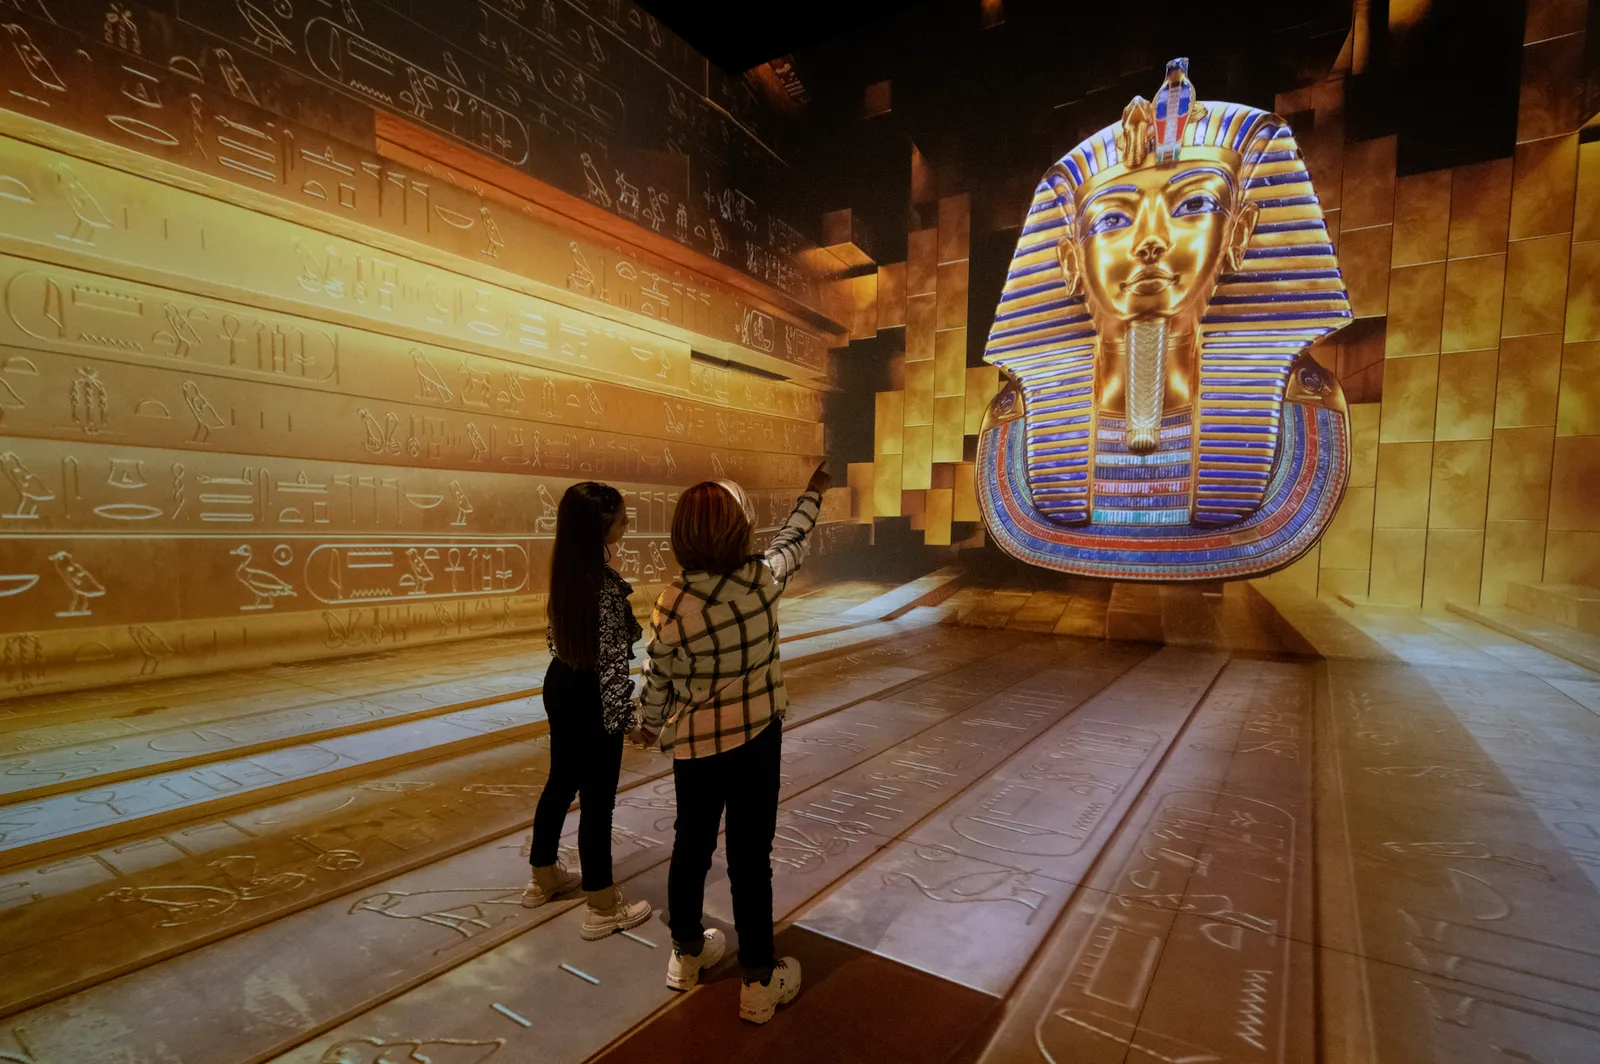 Video: At the heart of Boulevard World, the King Tut museum’s cutting-edge technology brings history to life